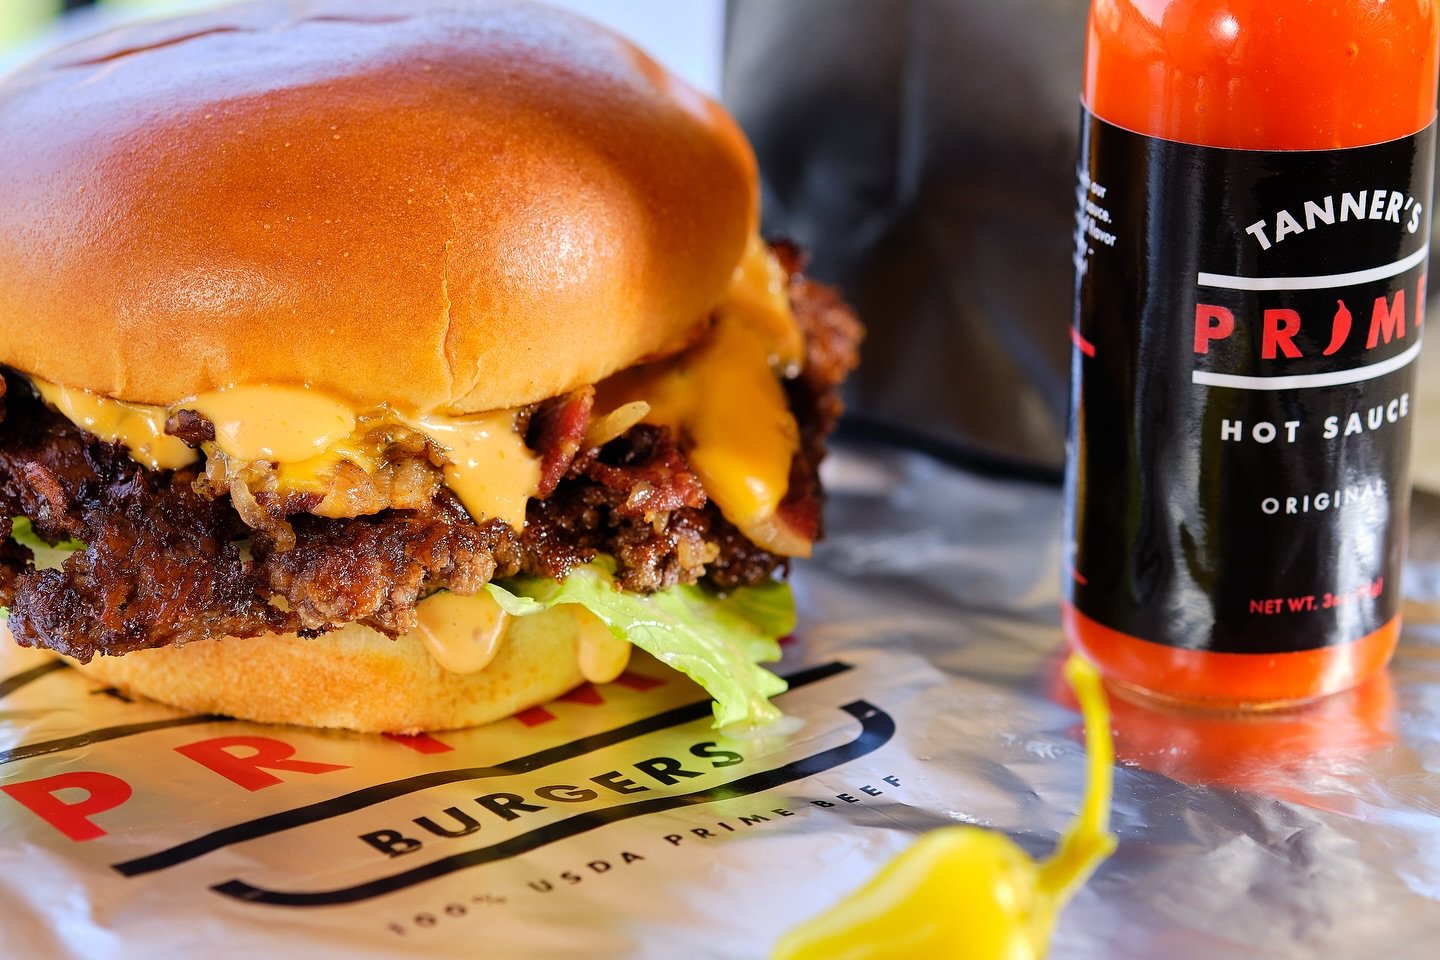 Tanner's Prime Burger opening their first brick-and-mortar location this week in Oceanside, San Diego featuring a bruger and Tanner's Prime hot sauce